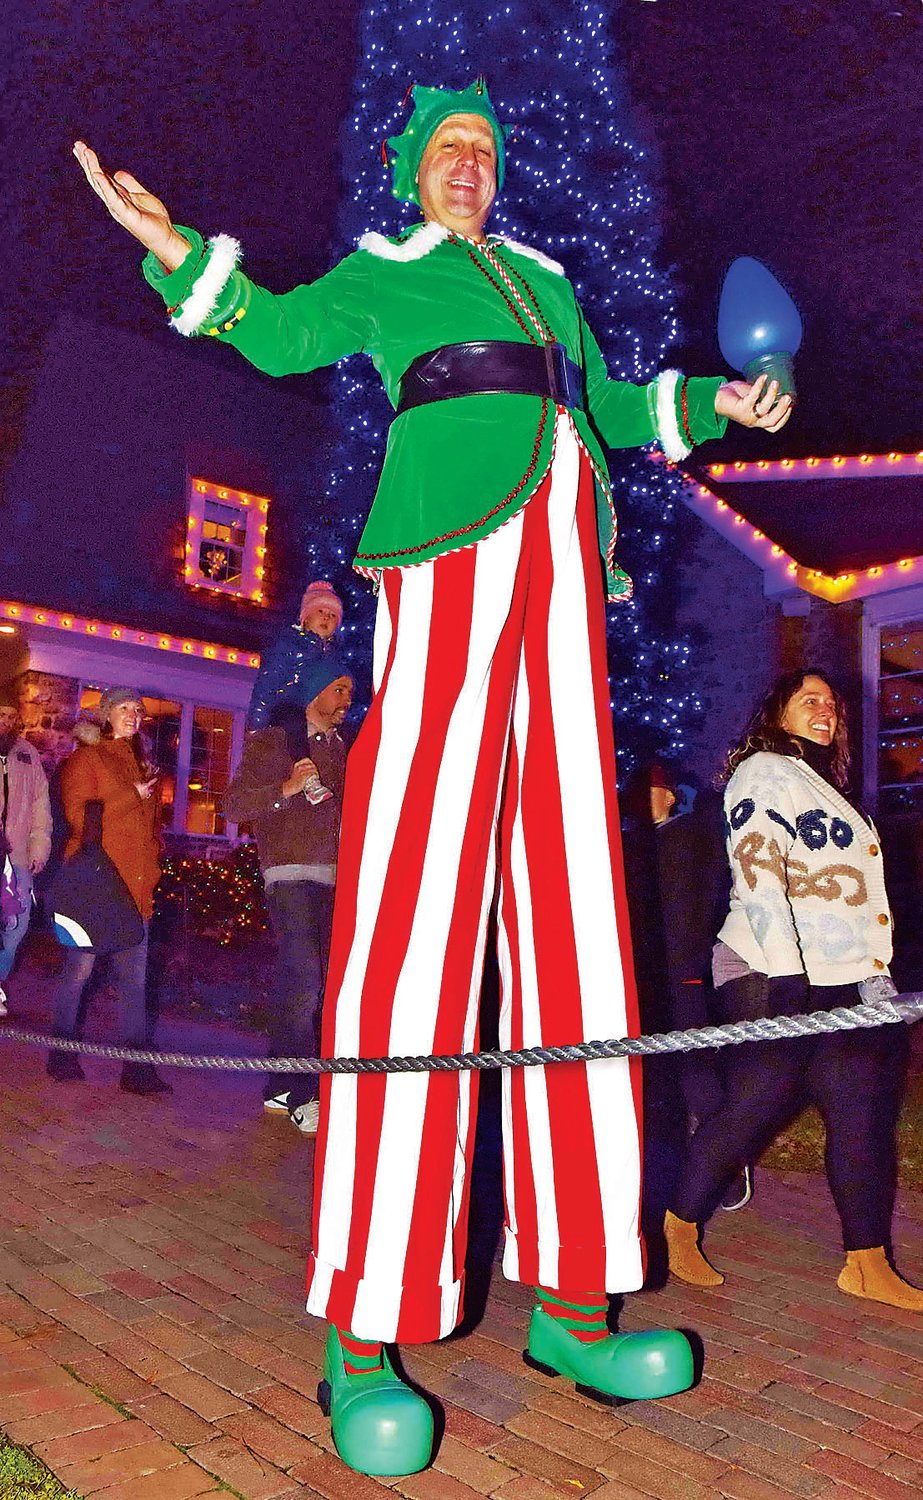 A holiday entertainer walks with guests through the lighting displays.